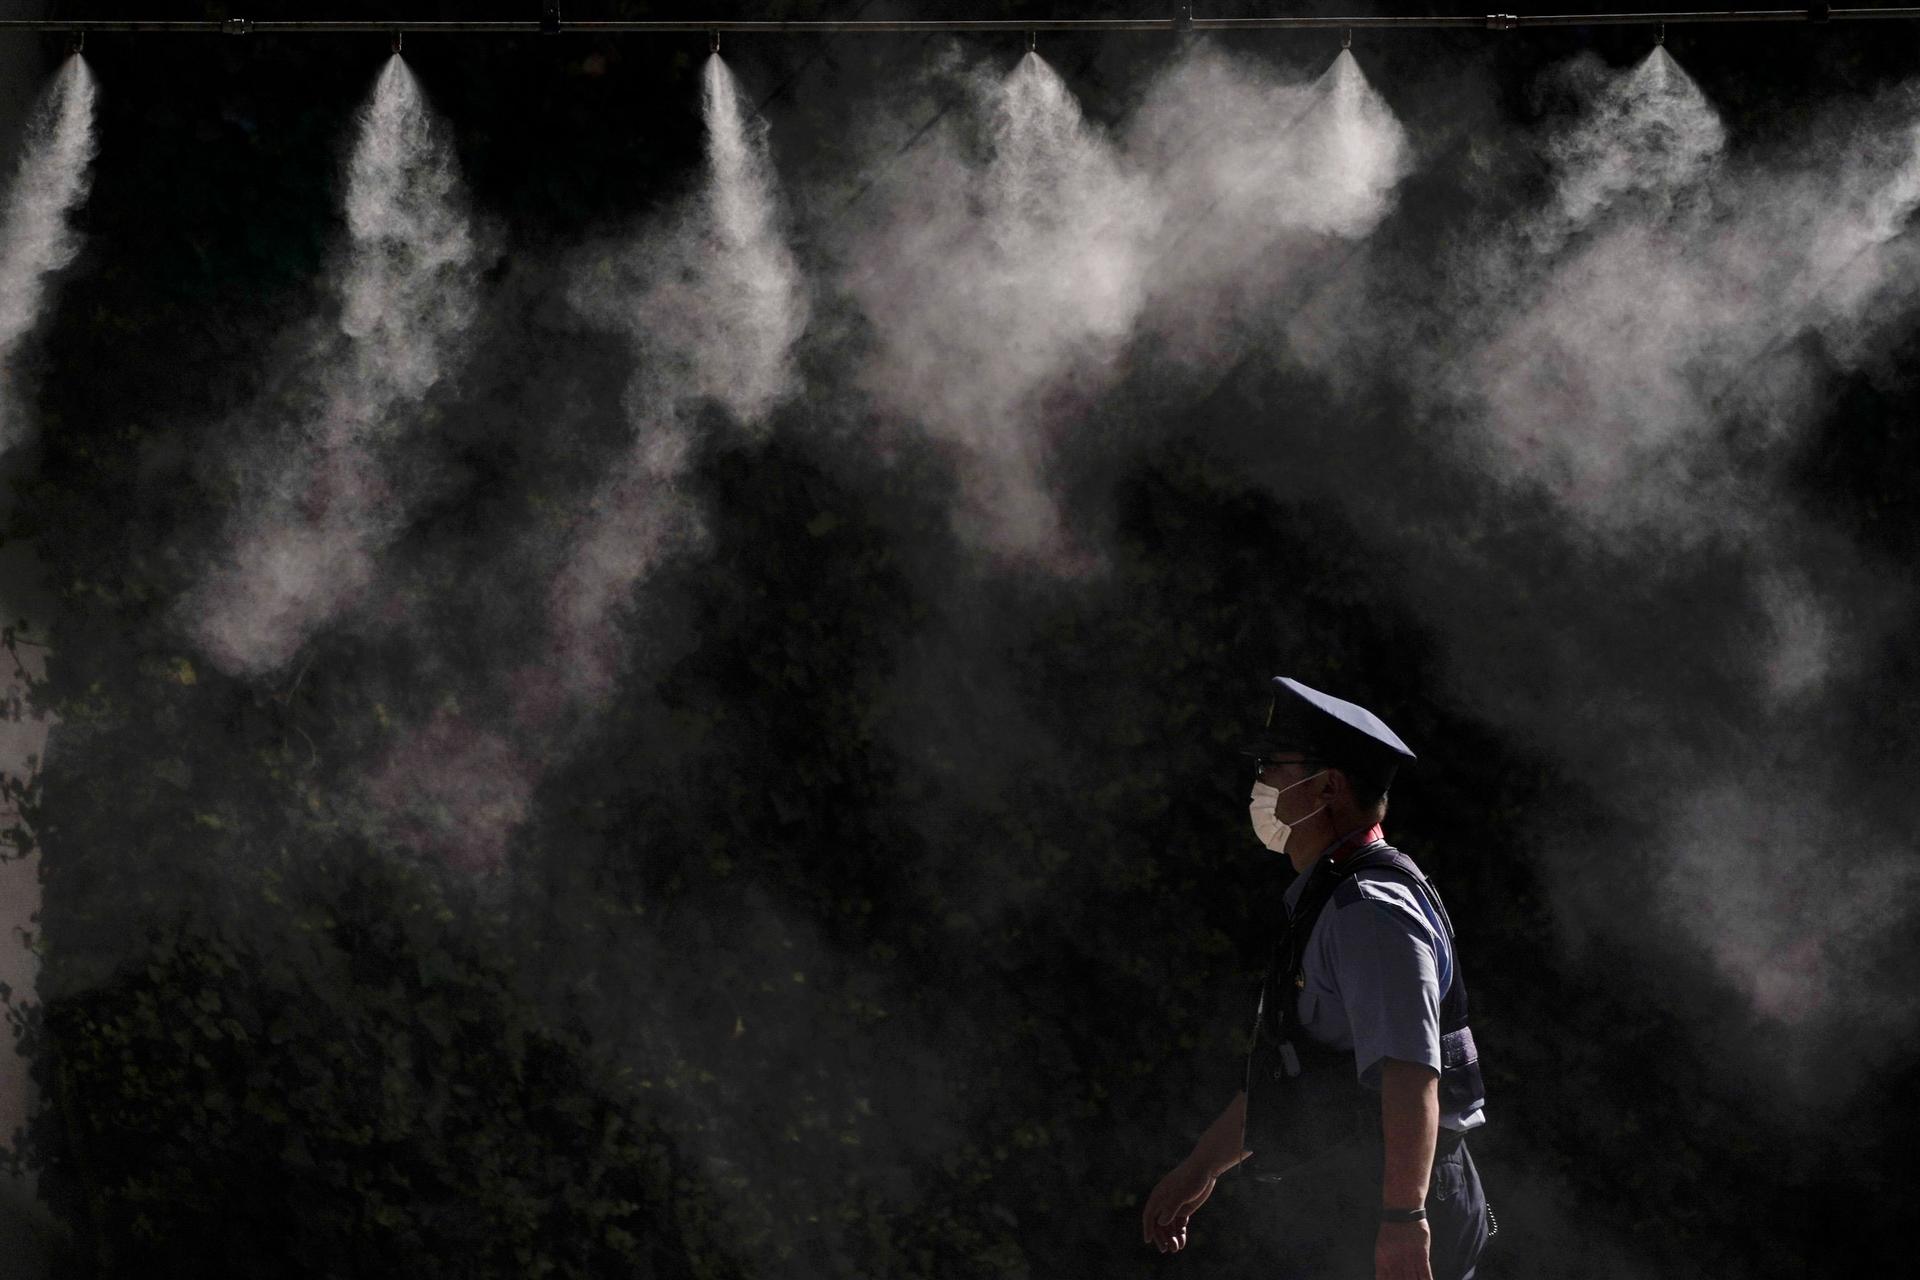 A police officer is shown wearing a white mask and walking under several misters spraying water.